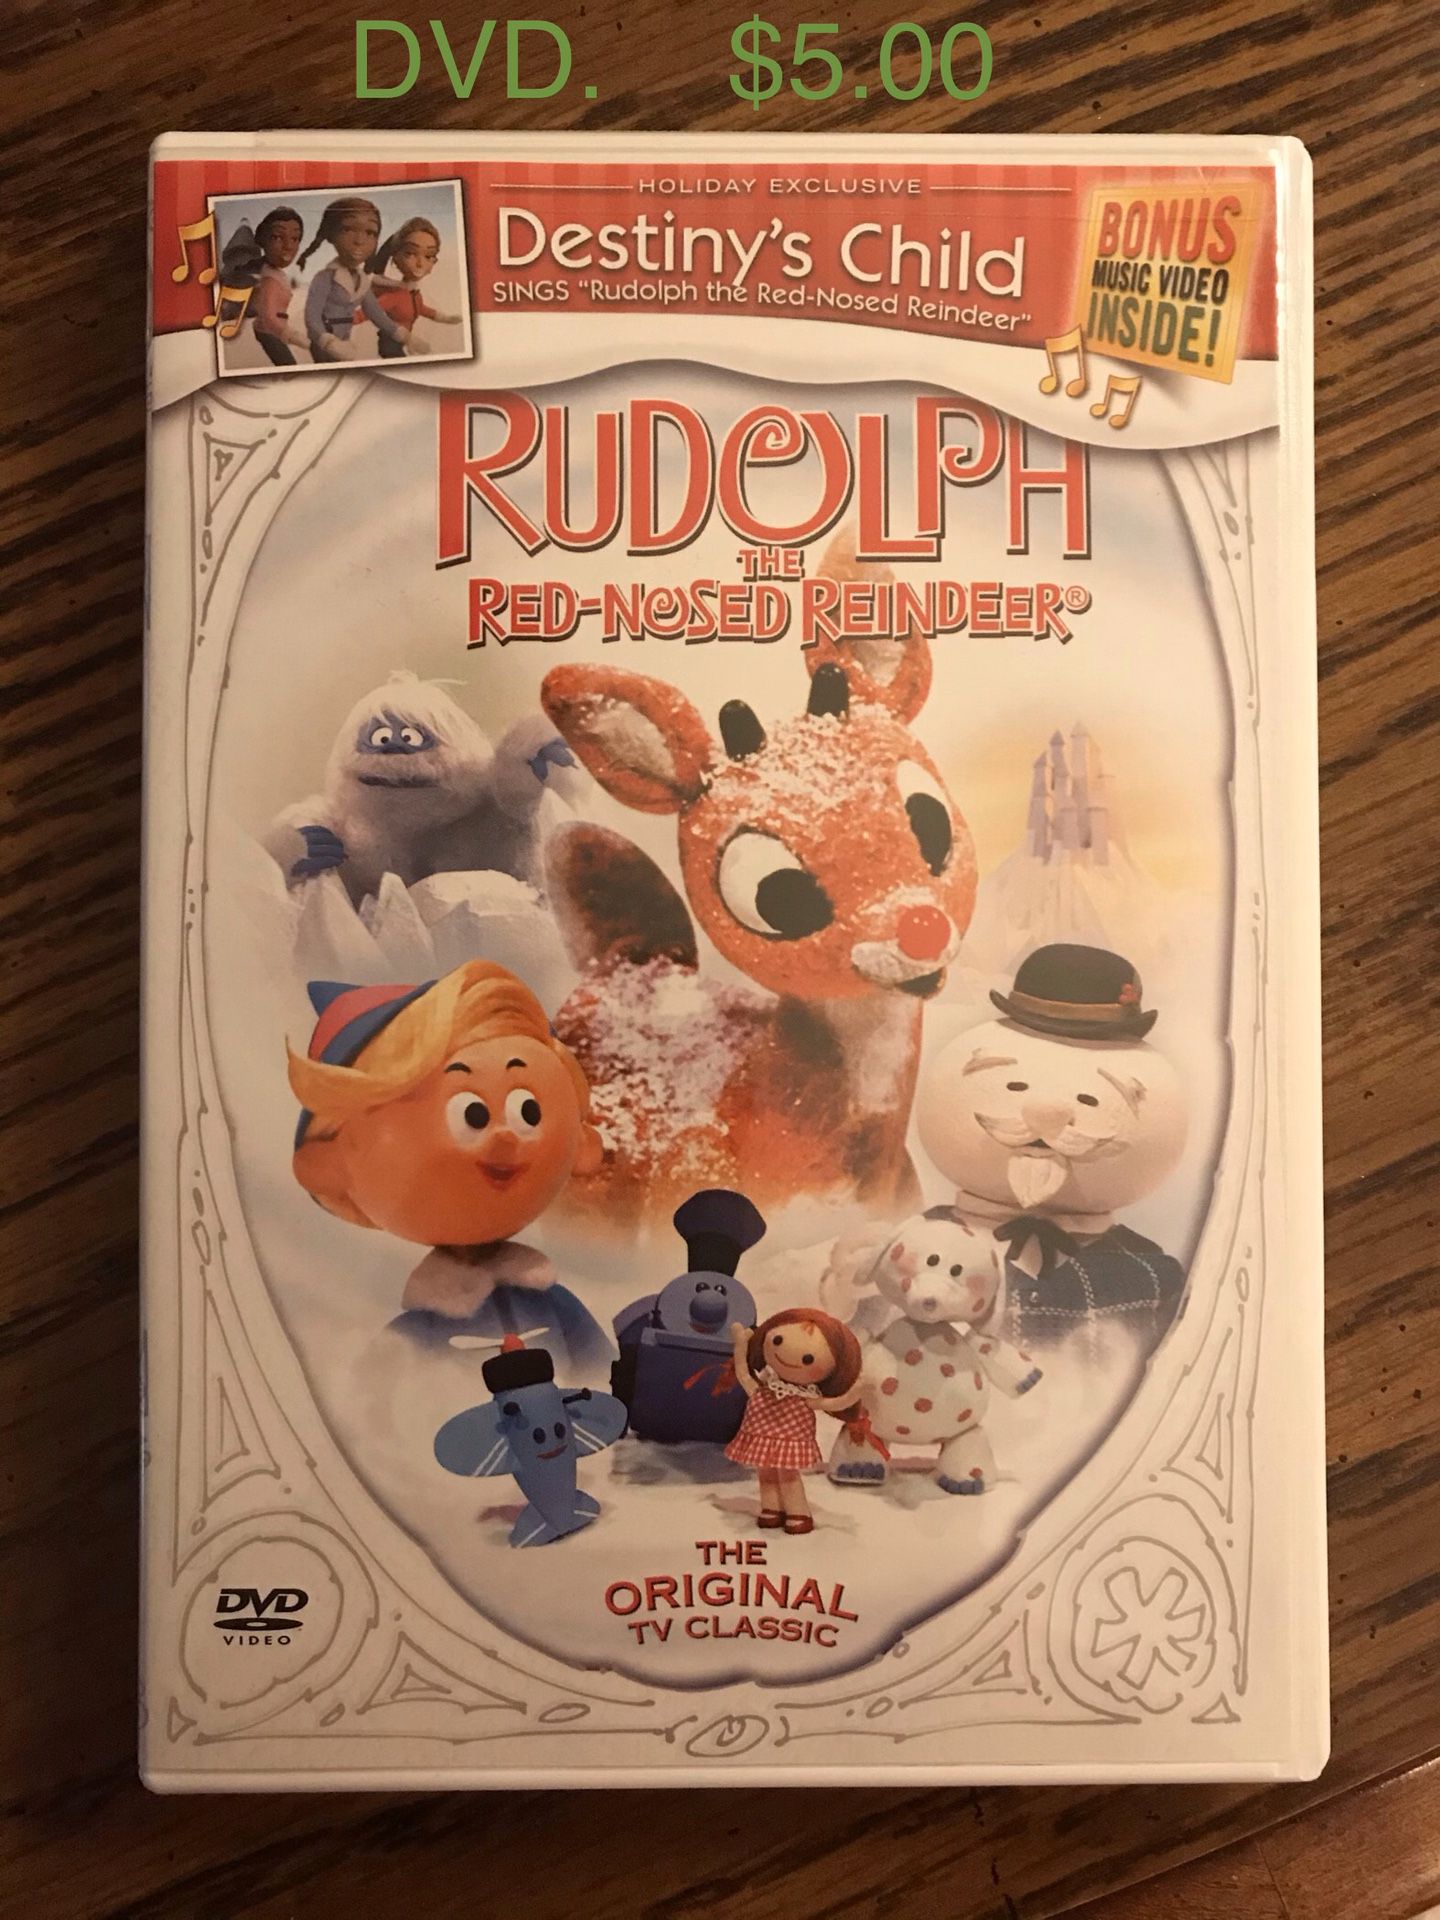 Rudolph the Red Nosed Reindeer DVD